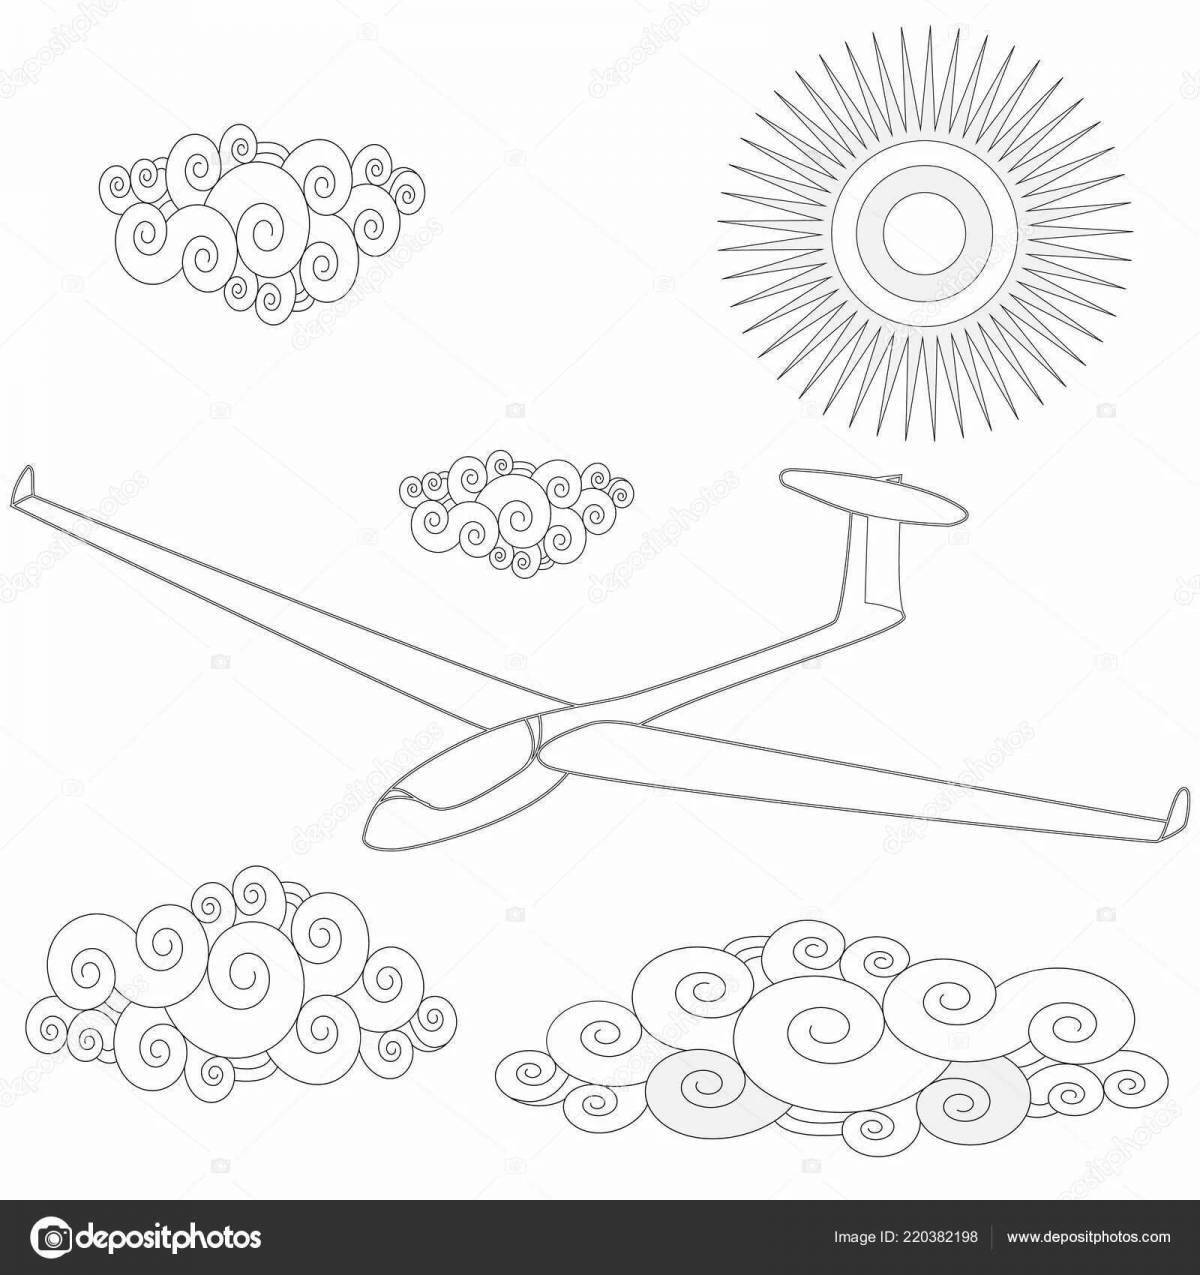 Splendorous glider coloring page